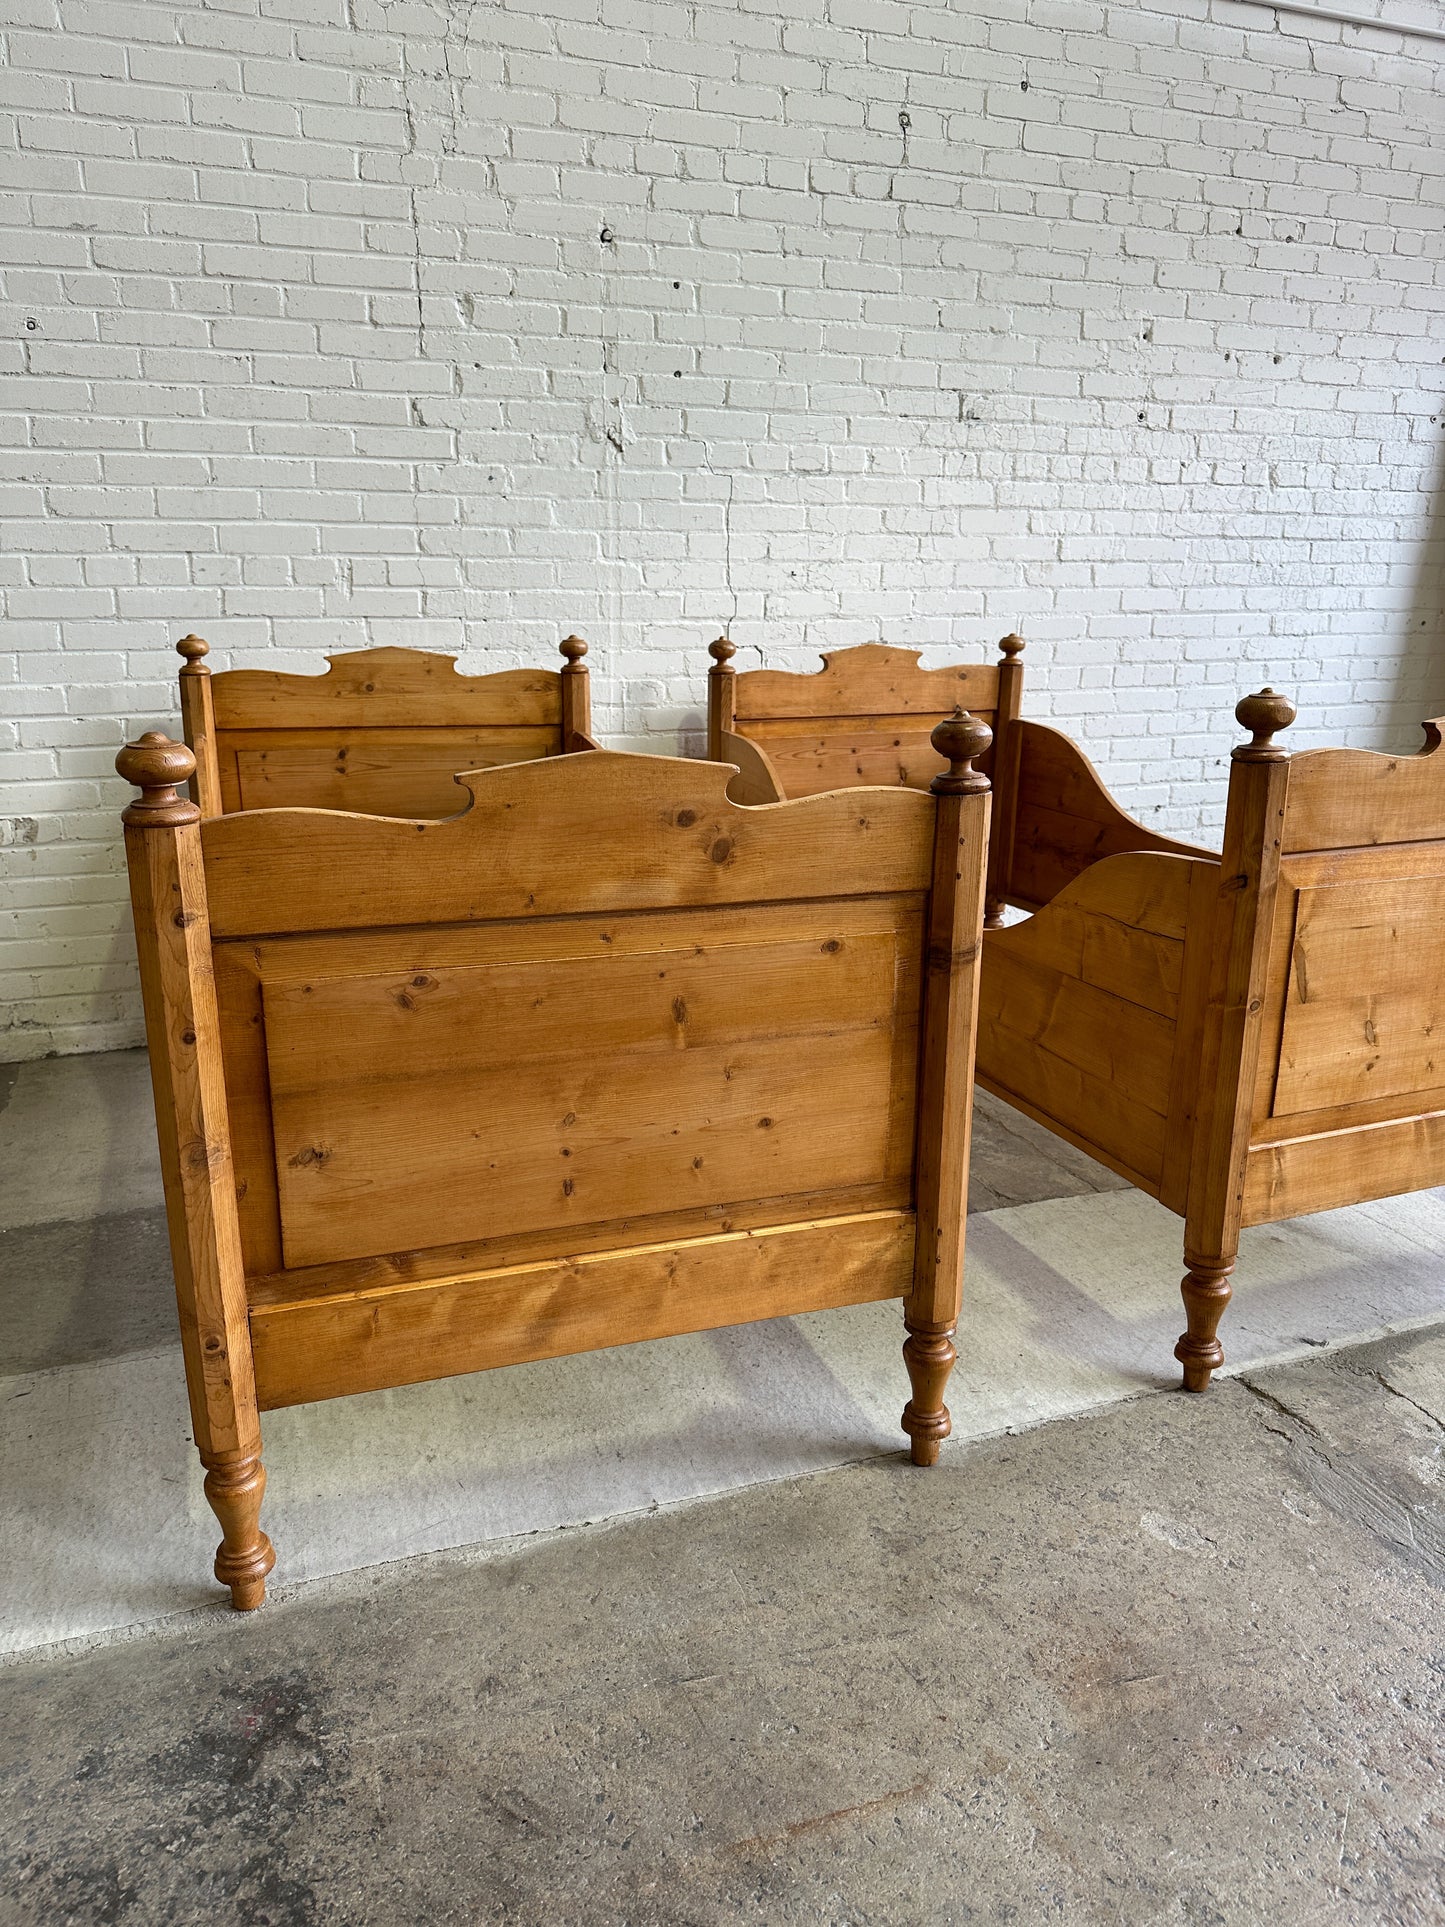 A Pair of Antique Pine Sleigh Beds, c. 1900